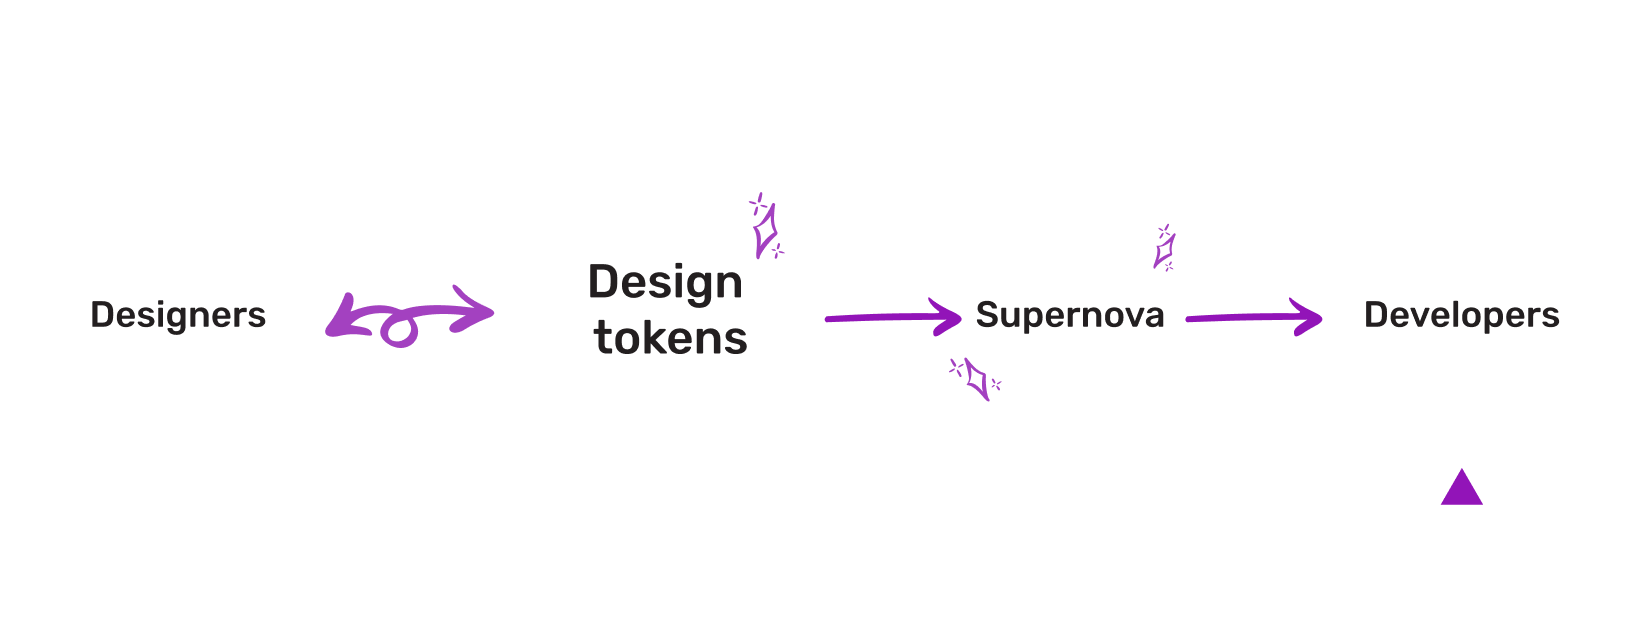 Schema: design tokens in the middle, linked bidirectionnaly to designers on the left.  It is now linked to Supernova on the right, which is now linked to developers on the far right.